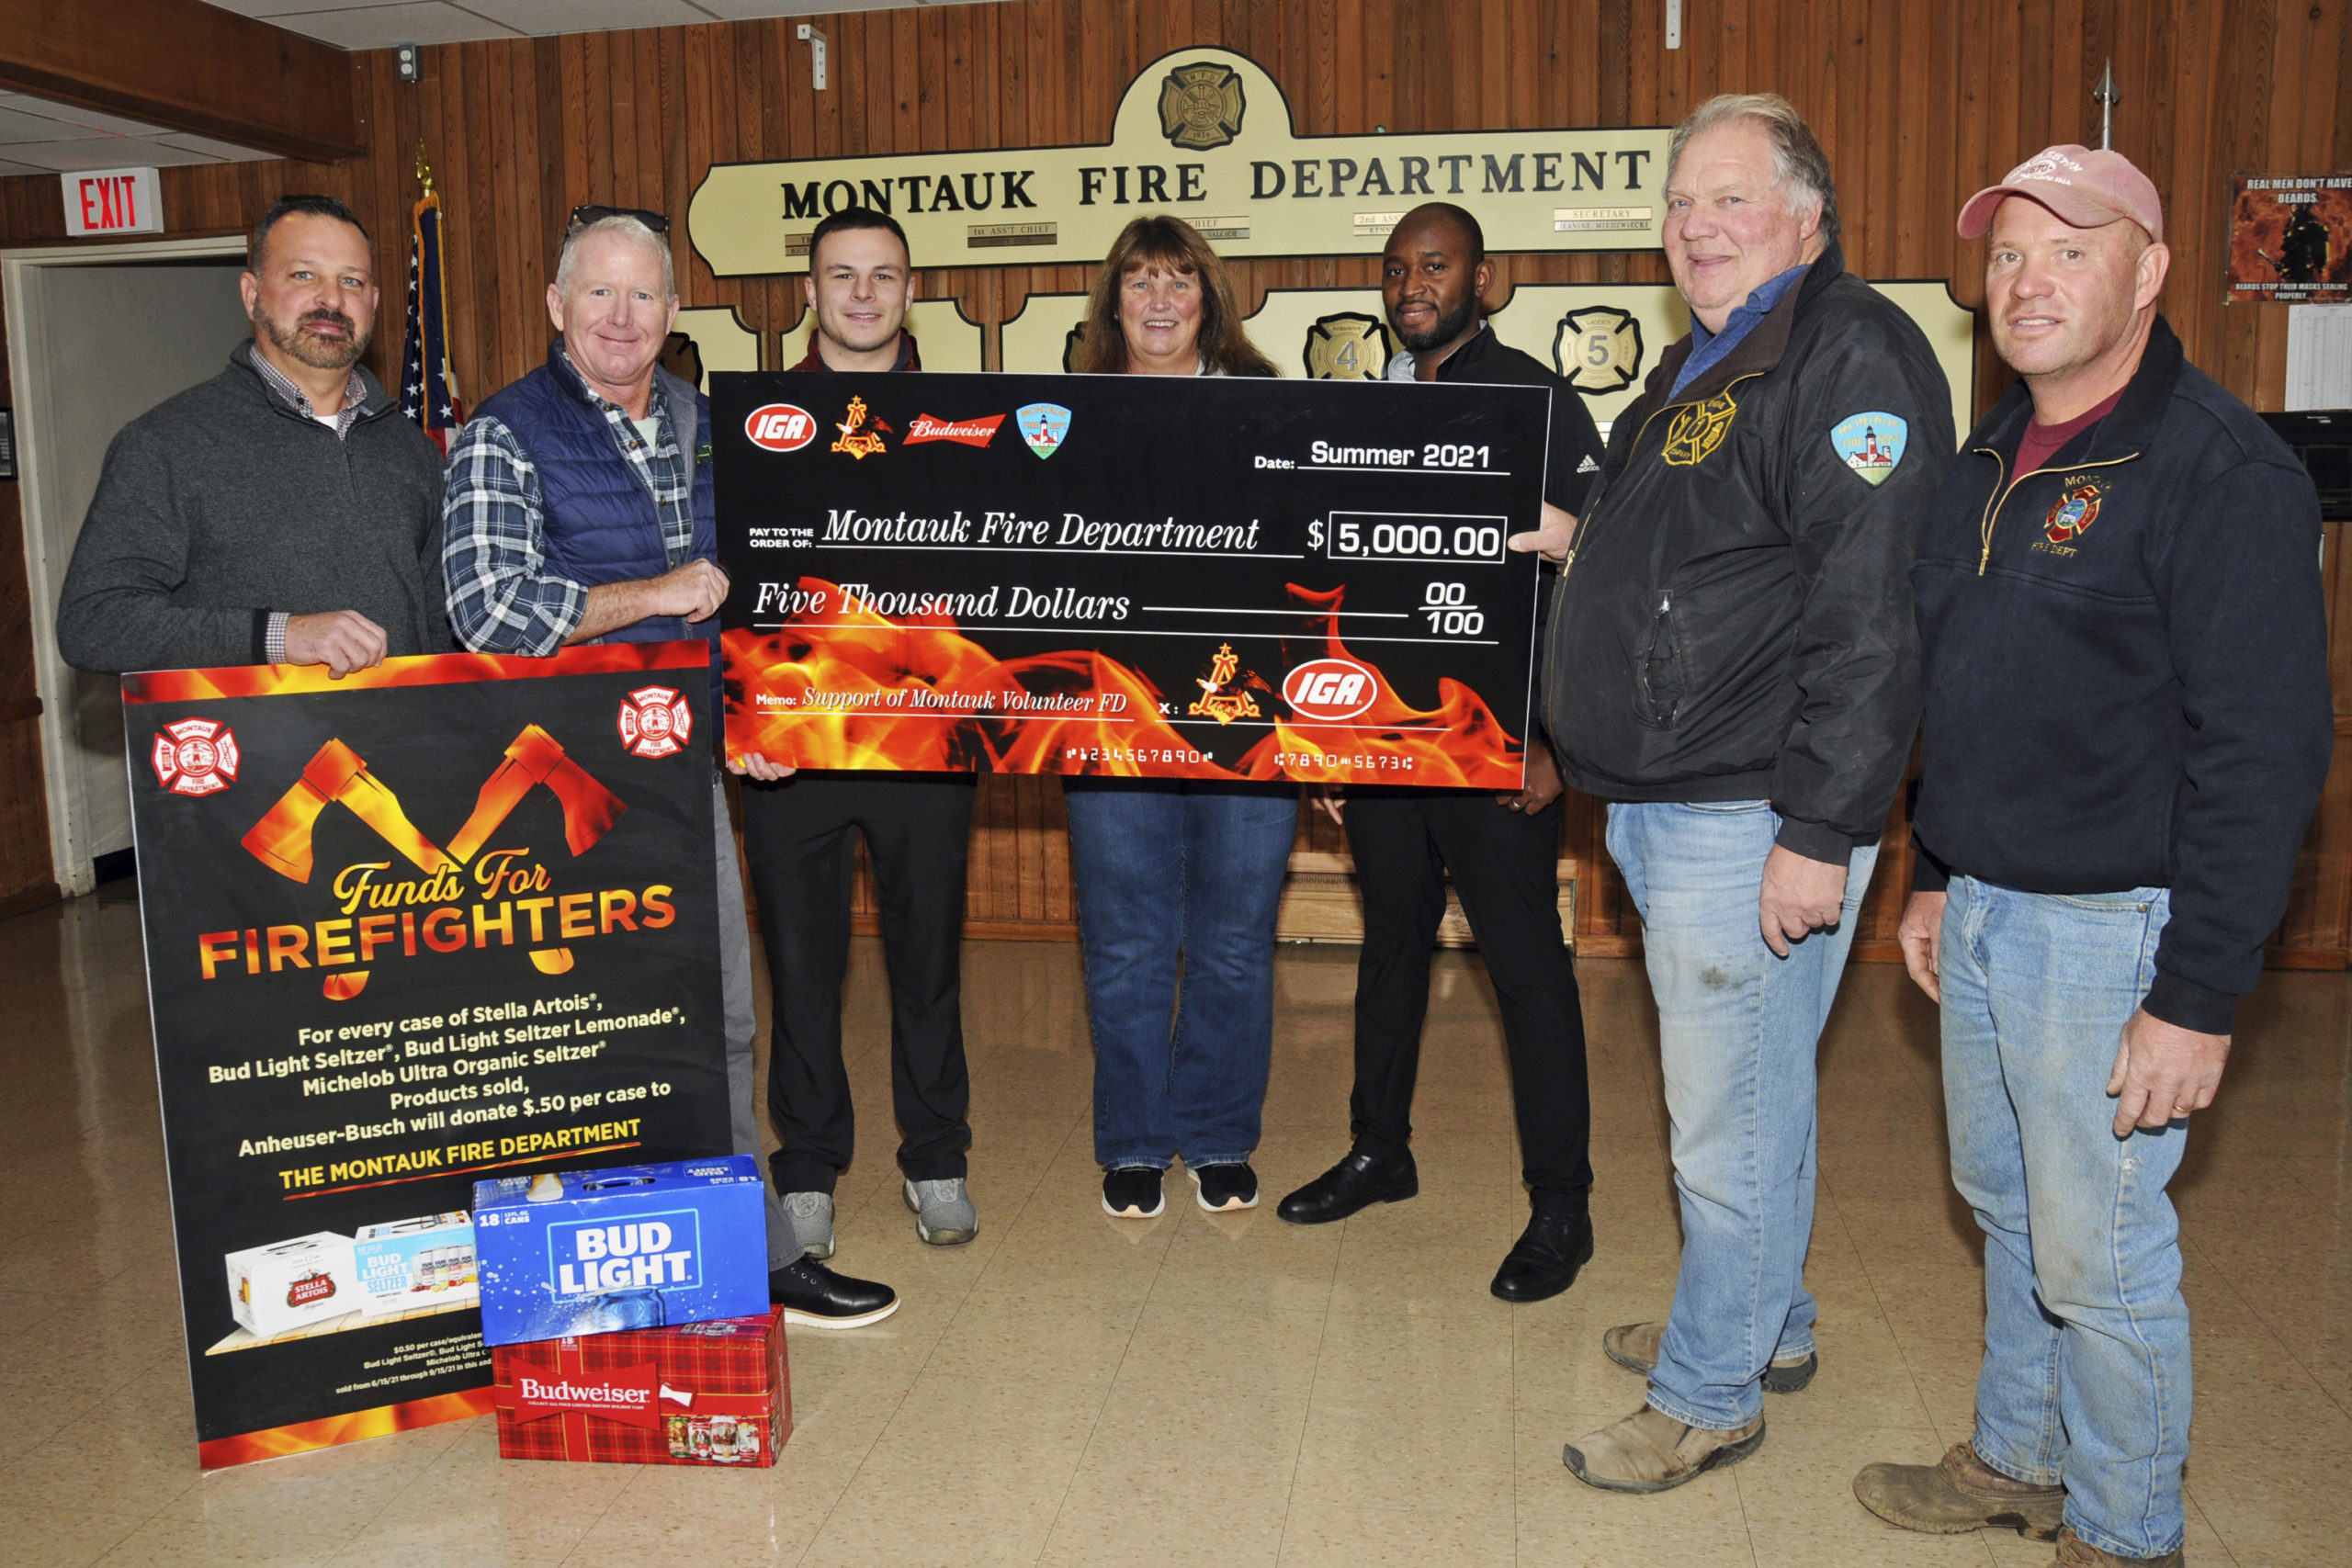 On December 7, Personnel from the IGA, Anheuser-Busch and Clare Rose Distributors presented a check to the Montauk Fire Department from their 